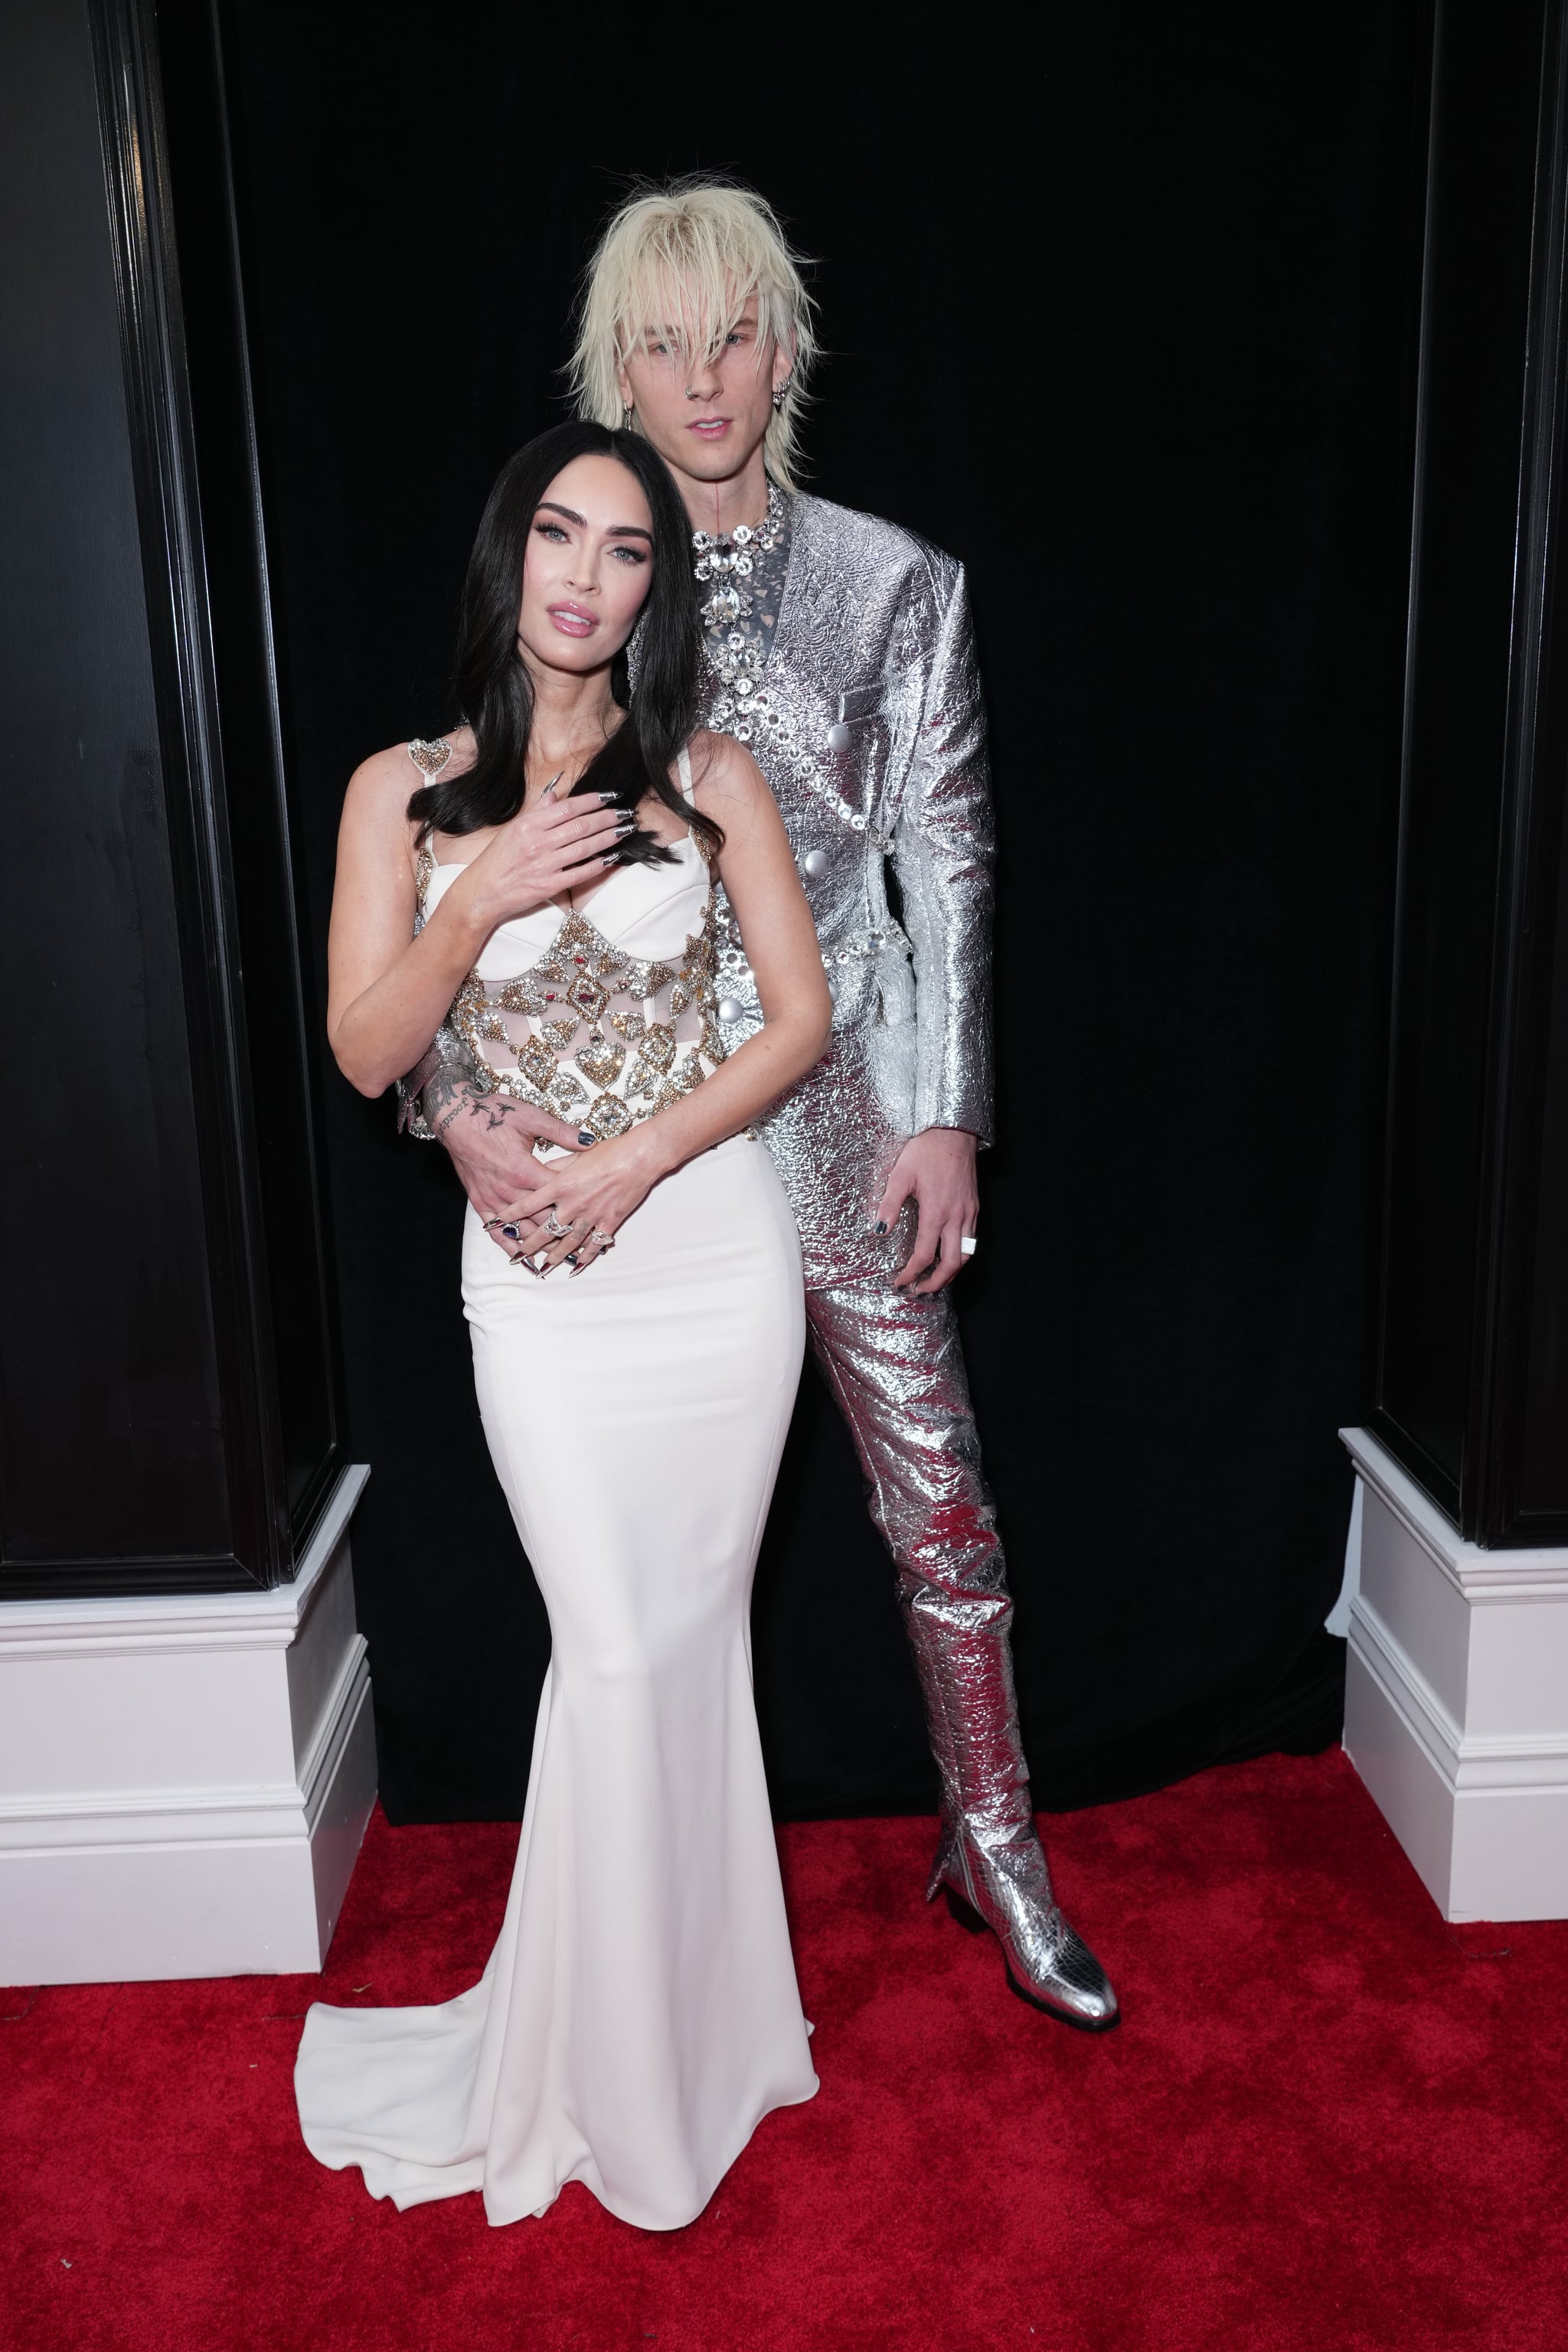 LOS ANGELES, CALIFORNIA - FEBRUARY 05: (L-R) Megan Fox and Machine Gun Kelly attend the 65th GRAMMY Awards on February 05, 2023 in Los Angeles, California. (Photo by Kevin Mazur/Getty Images for The Recording Academy)